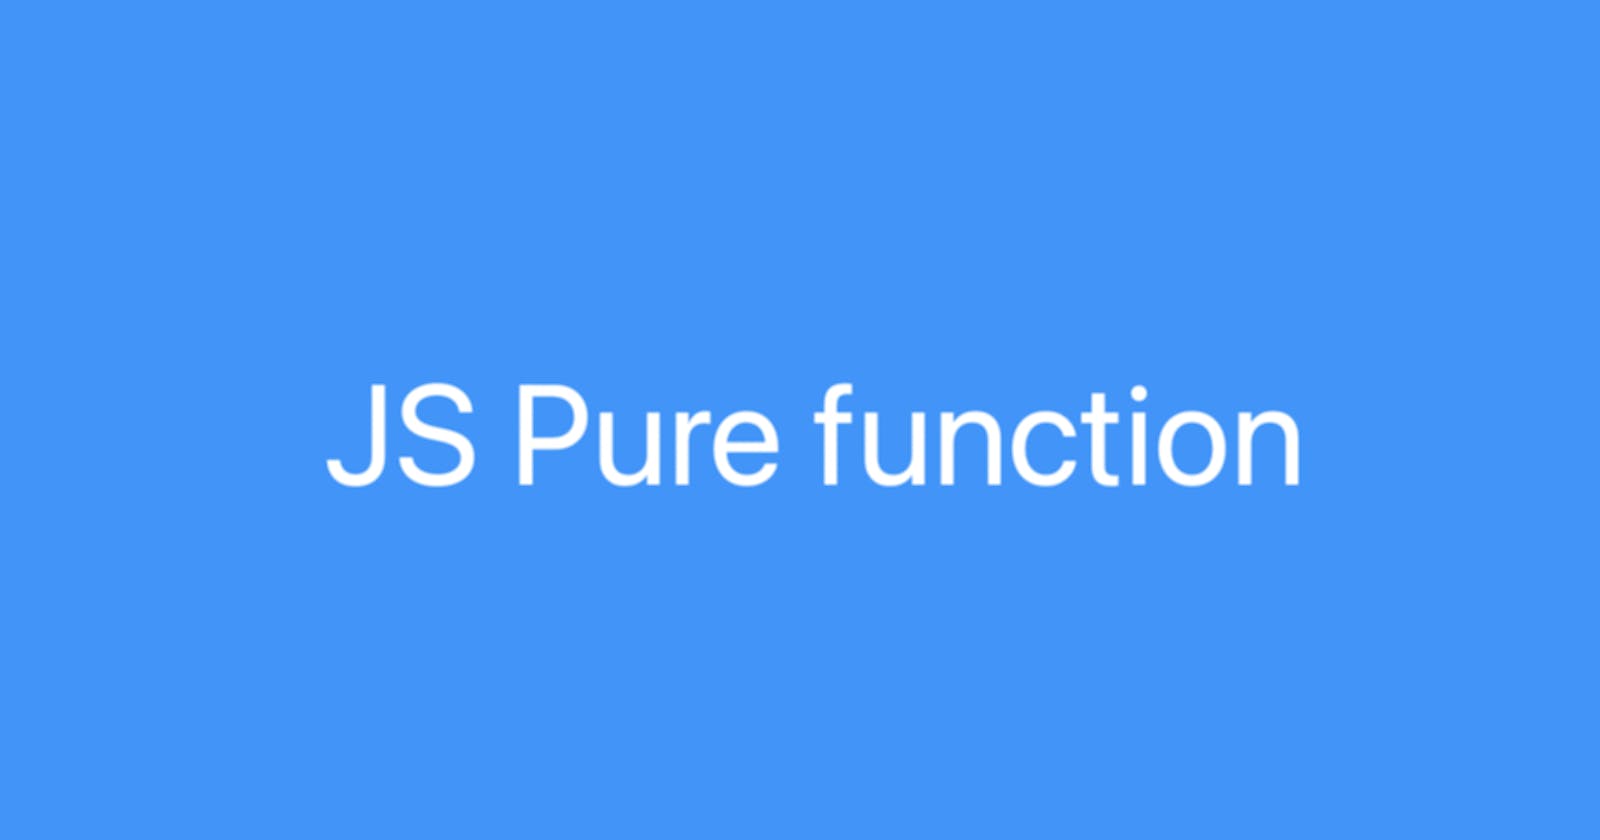 JS Pure function